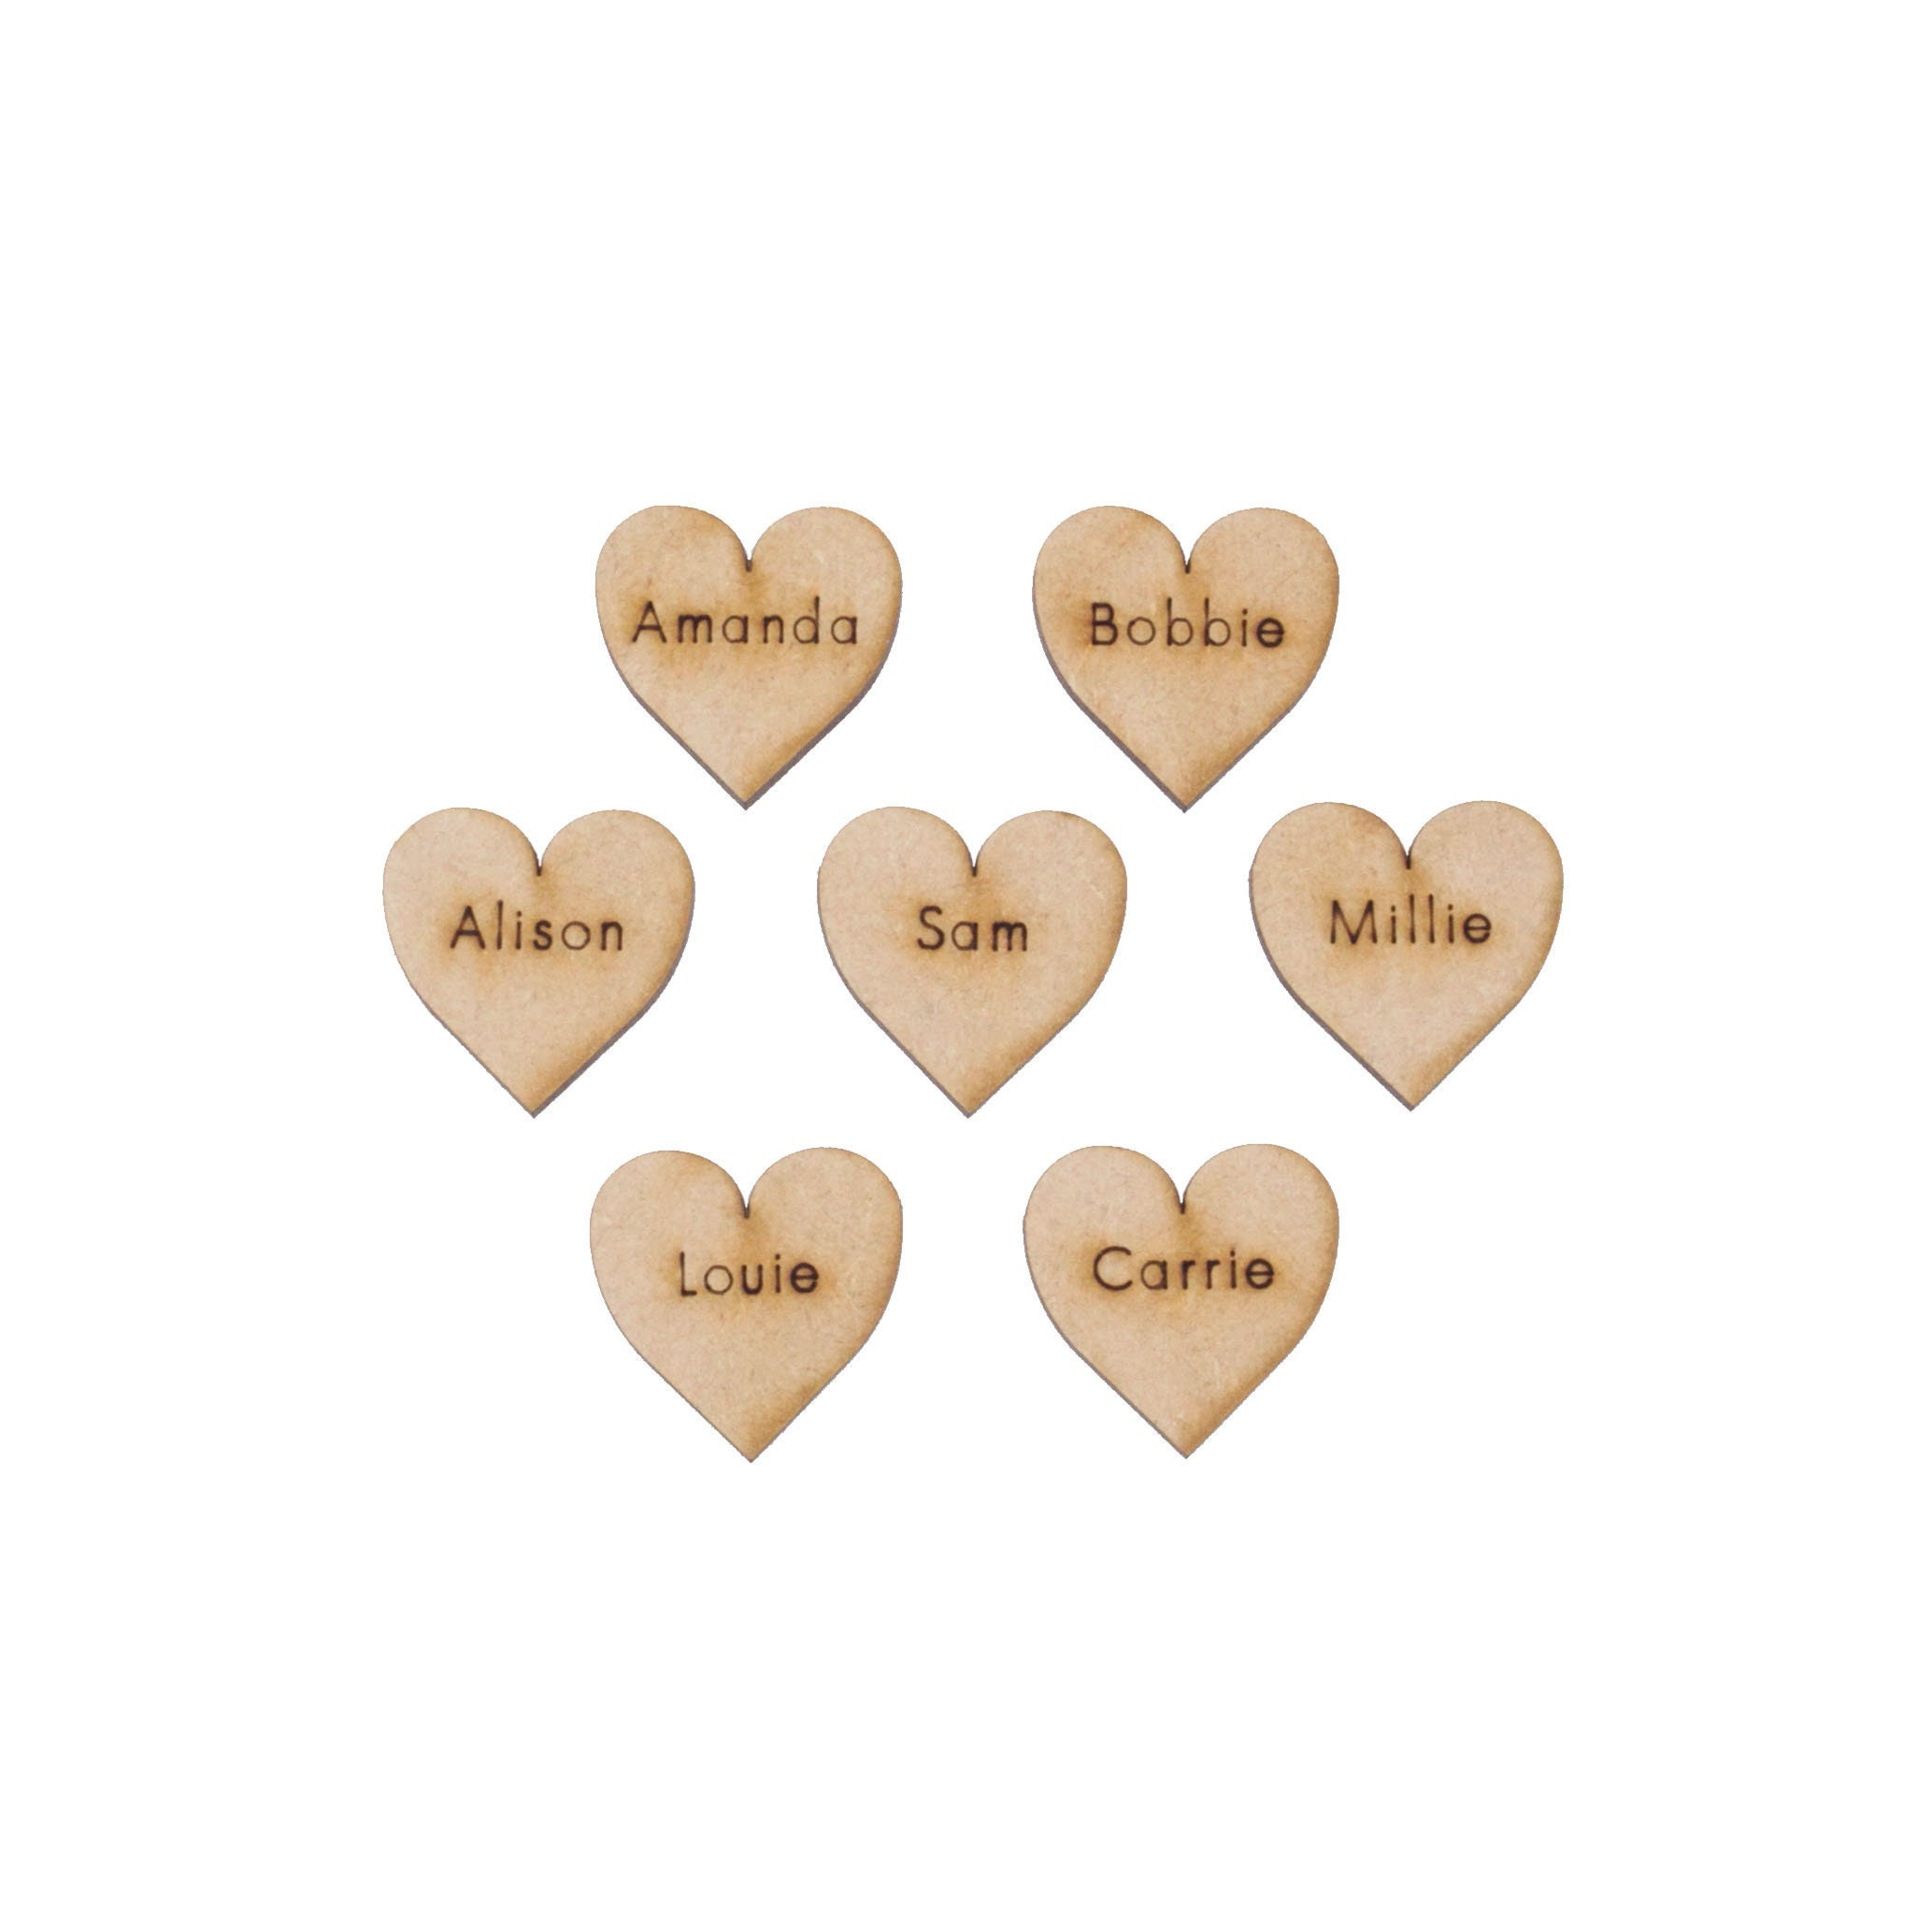 3cm Hearts Personalised With Your Names Laser Cut From 3mm Mdf Wood | Scrapbooking Card Making Wedding Favours Custom